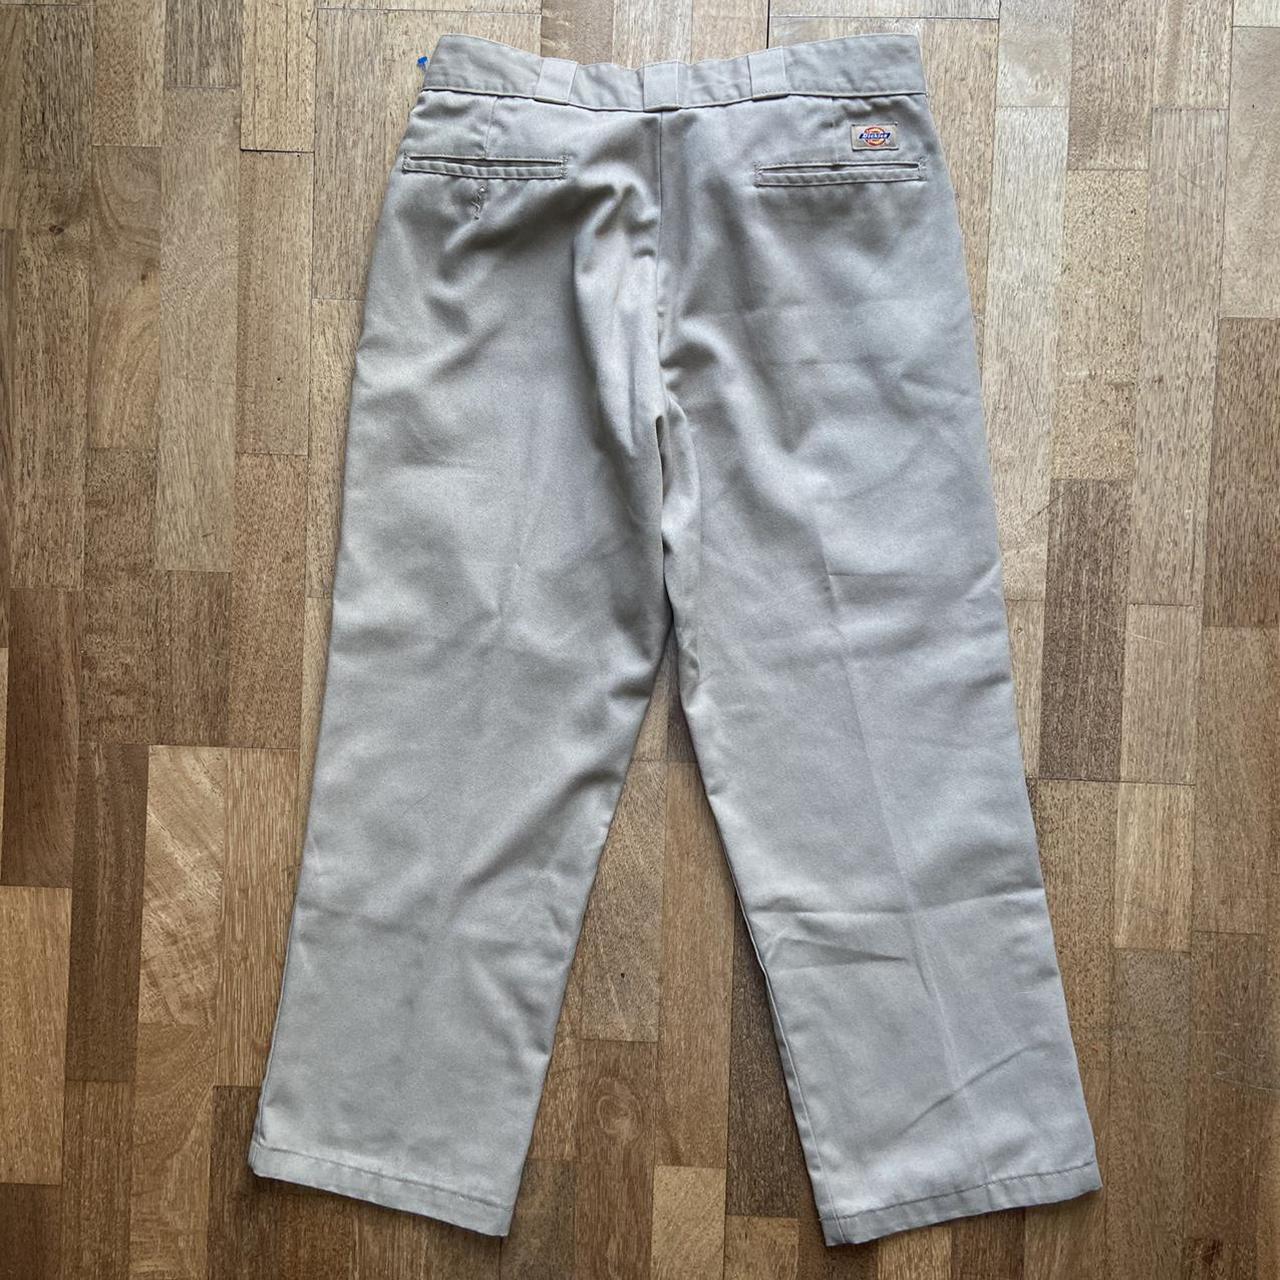 Product Image 4 - Vintage Dickies 874 trousers pants
Color